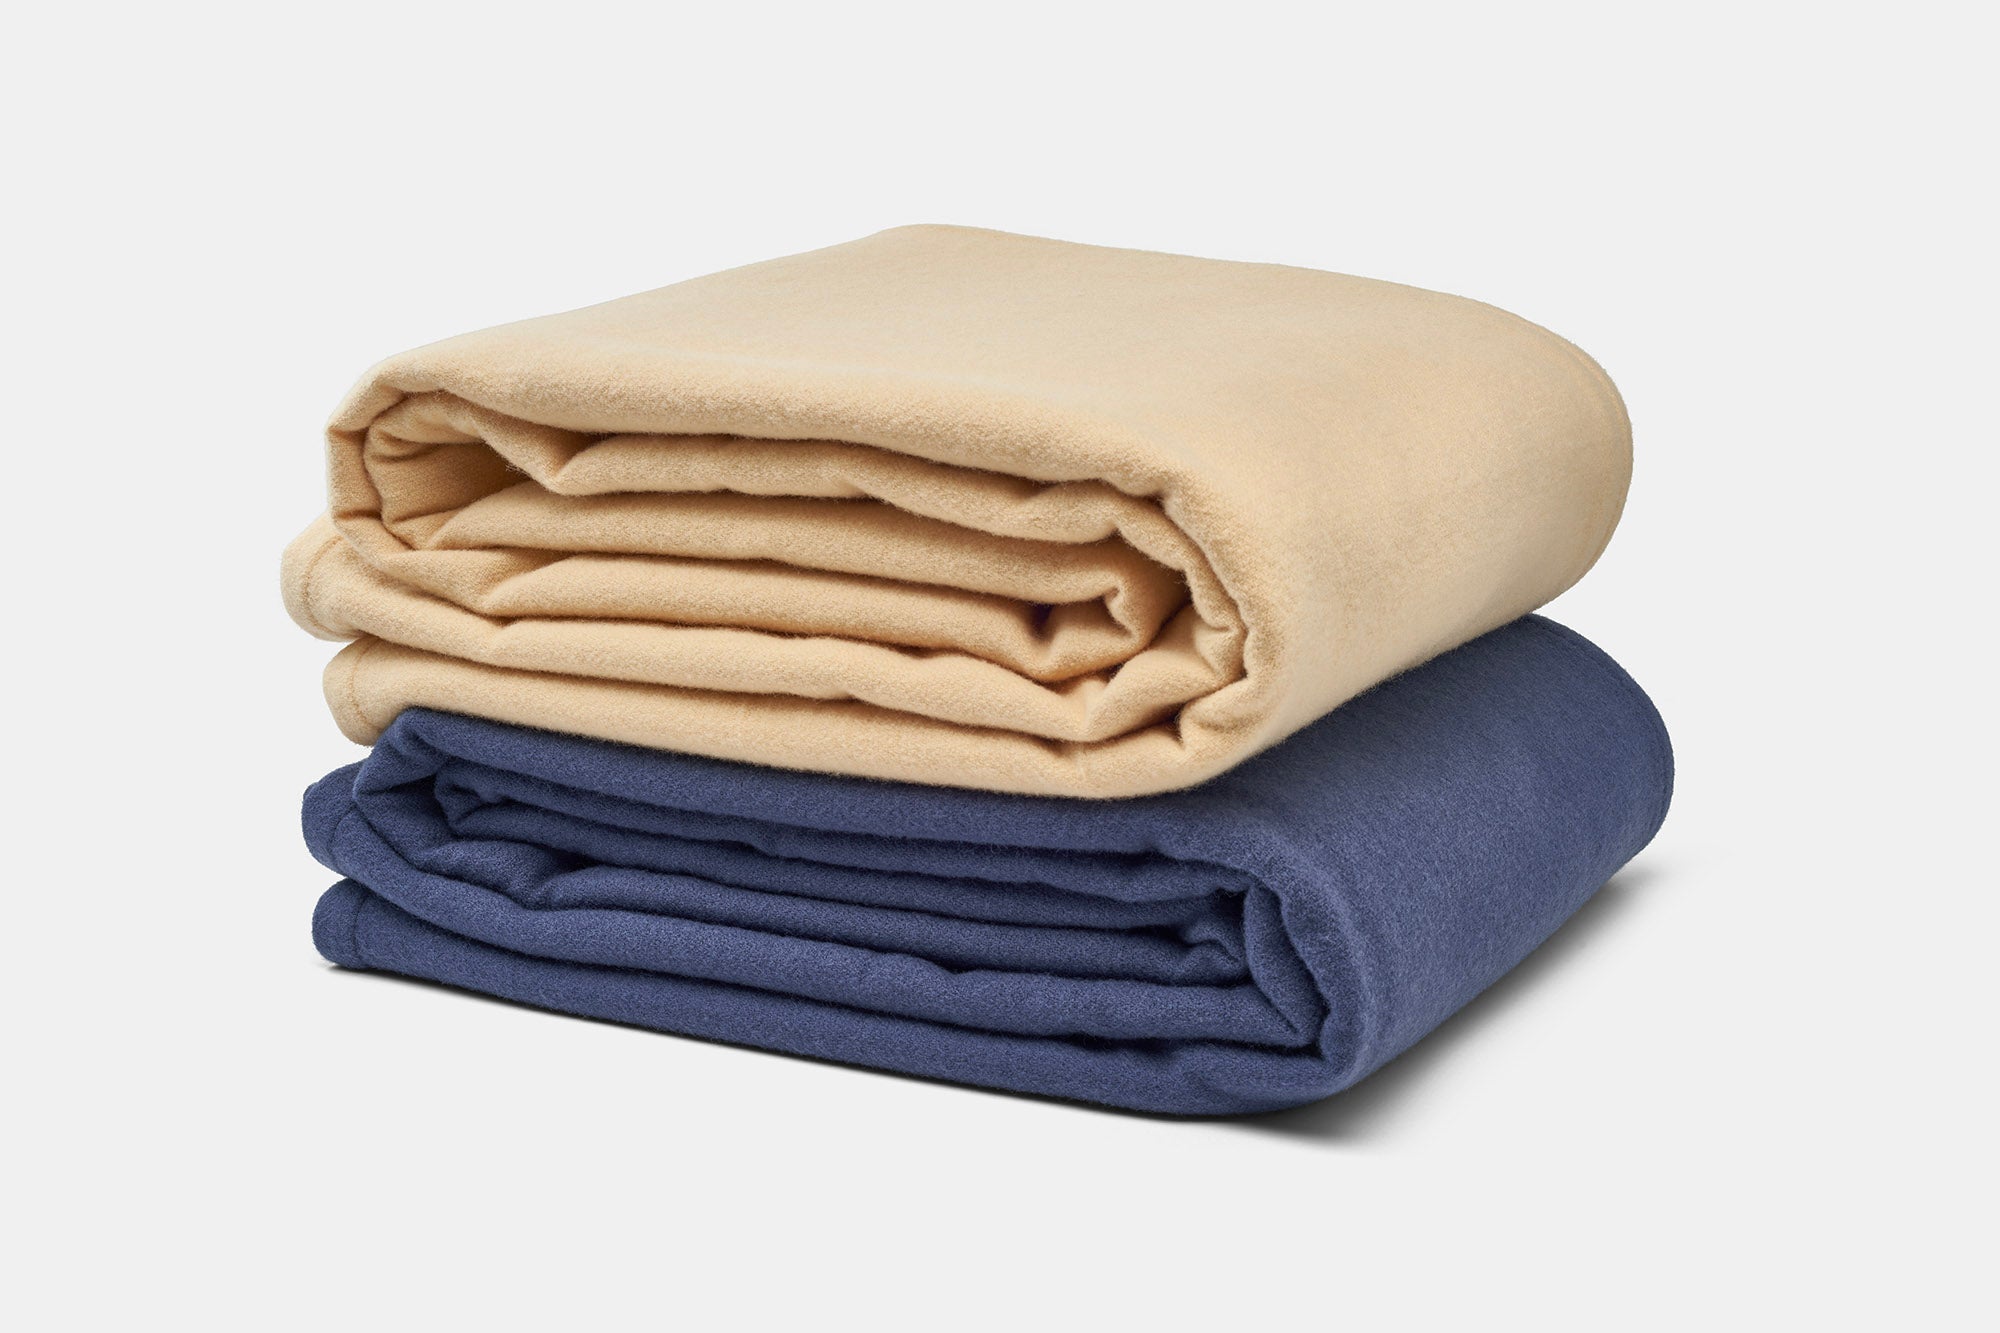 Stack of Blankets Blue Steel and Honey Soft Lightweight Blanket 100% Virgin Wool Made in USA